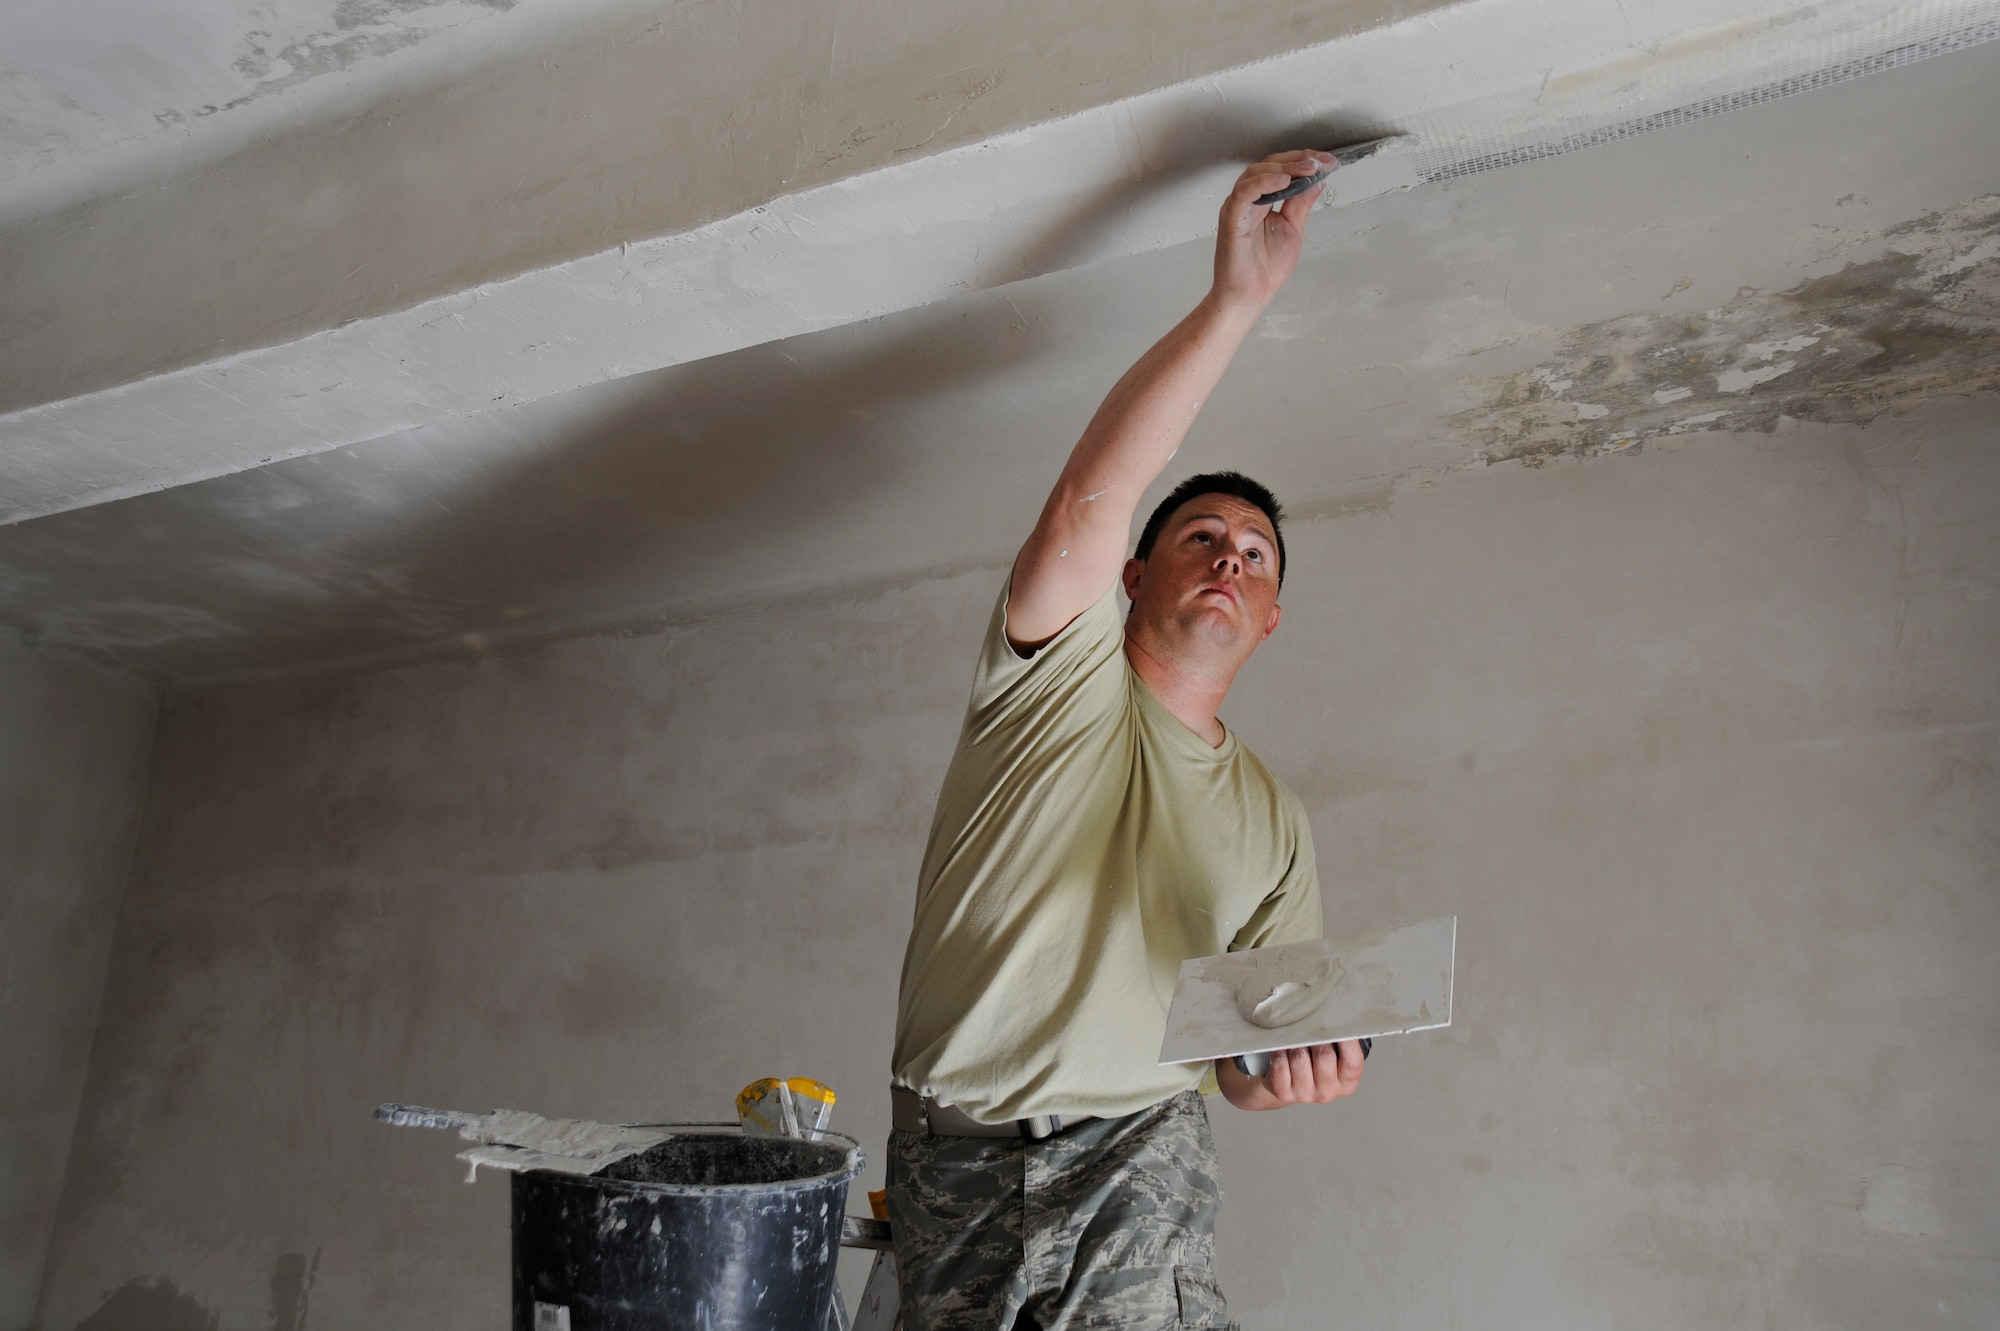 Oregon Air National Guard Tech. Sgt. Charles Jedda, assigned to the 142nd Fighter Wing Civil Engineer Squadron applies plaster to upgrade and repair water damage to a local health clinic in the city of Mangalia, Romania, May 11, 2015, as part of the U.S. European Command’s (EUCOM) Humanitarian Civic Assistance Program (HCA). The EUCOM HCA program is designed to improve the host nation's critical infrastructure and the underlying living conditions of the civilian populace. (U.S. Air National Guard photo by Tech. Sgt. John Hughel, 142nd Fighter Wing Public Affairs/Released)